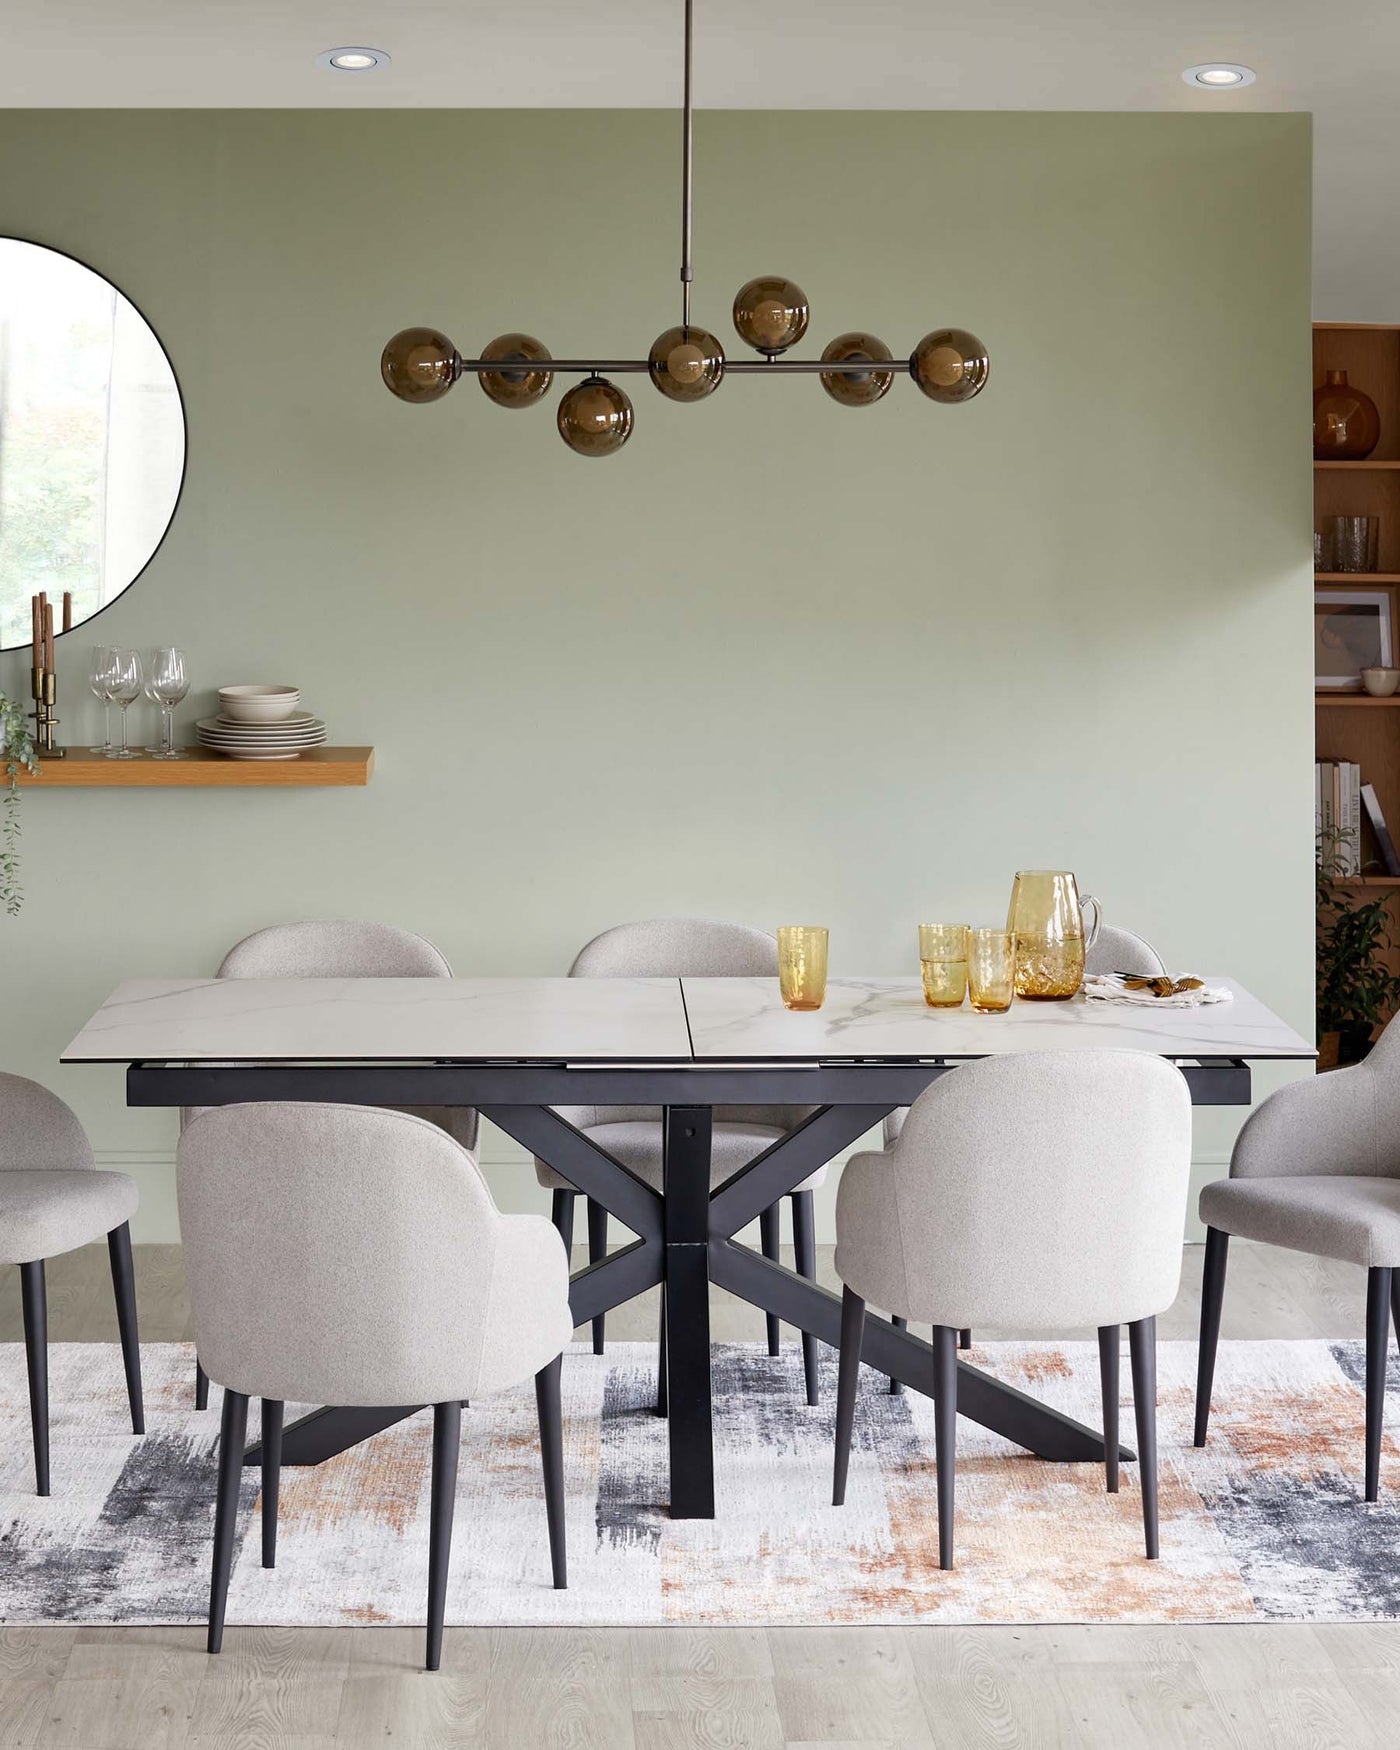 Modern dining room with an extendable black dining table featuring a white tabletop, surrounded by six grey upholstered chairs with black legs, over a multi-coloured area rug. A wooden shelf with dishes and a round mirror adorn the wall.